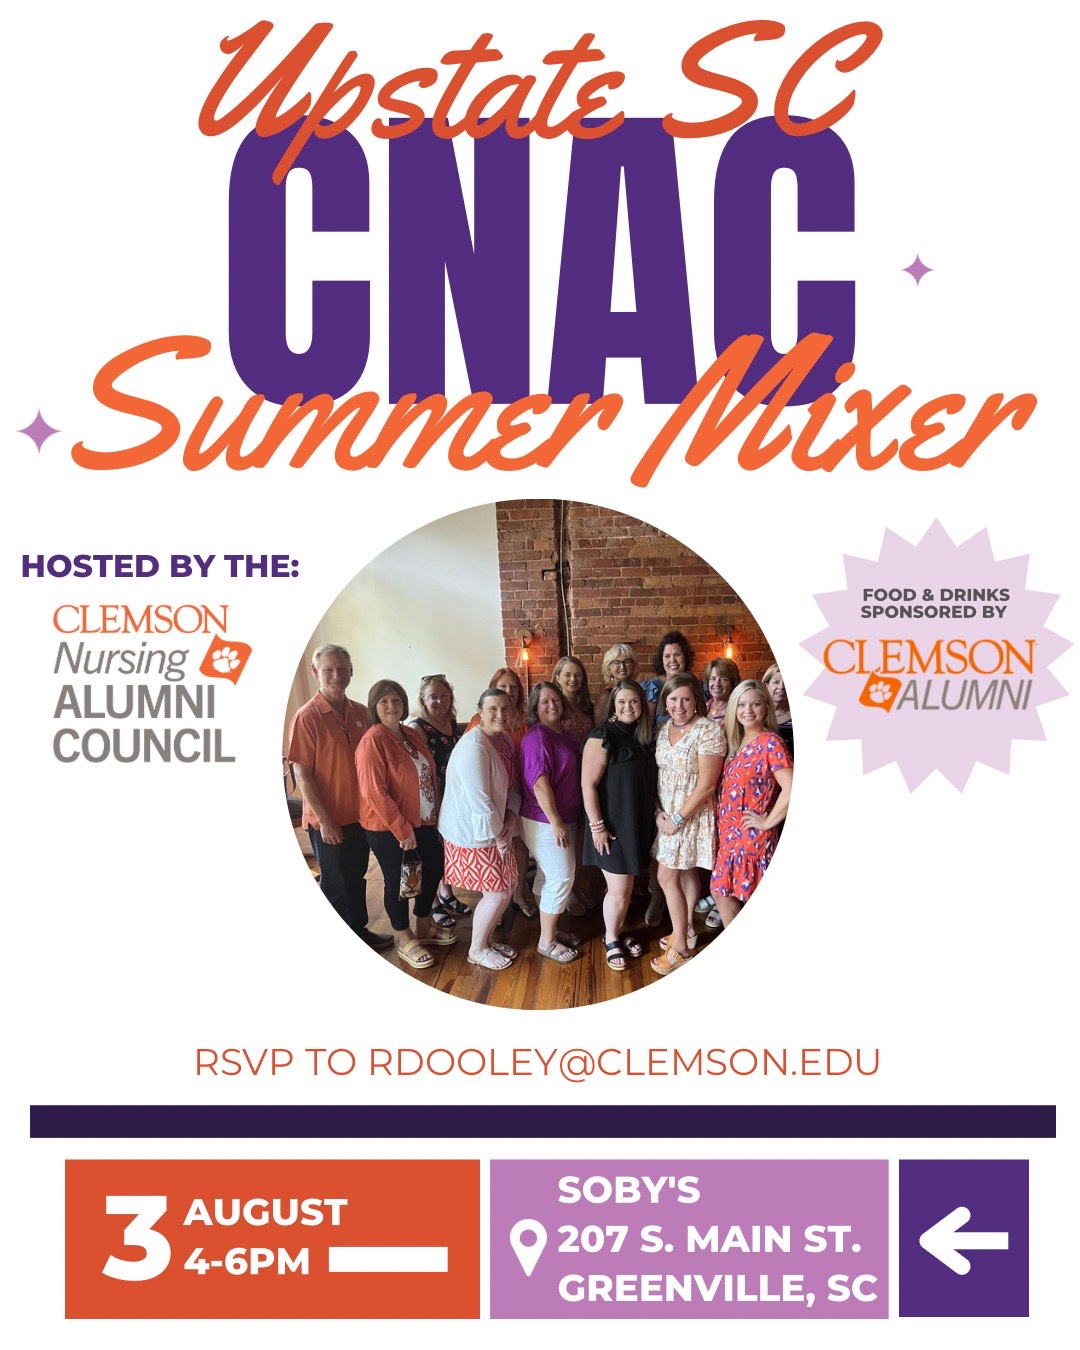 Upstate SC CNAC Summer Mixer hosted by the Clemson nursing alumni council. Food and drinks snored by Clemson Alumni. Dates are August 3, 2024 from 4pm to 6pm. The location is Soby's restaurant, 207 South Main Street, Greenville, SC. Please RSVP to rdooley@clemson.edu